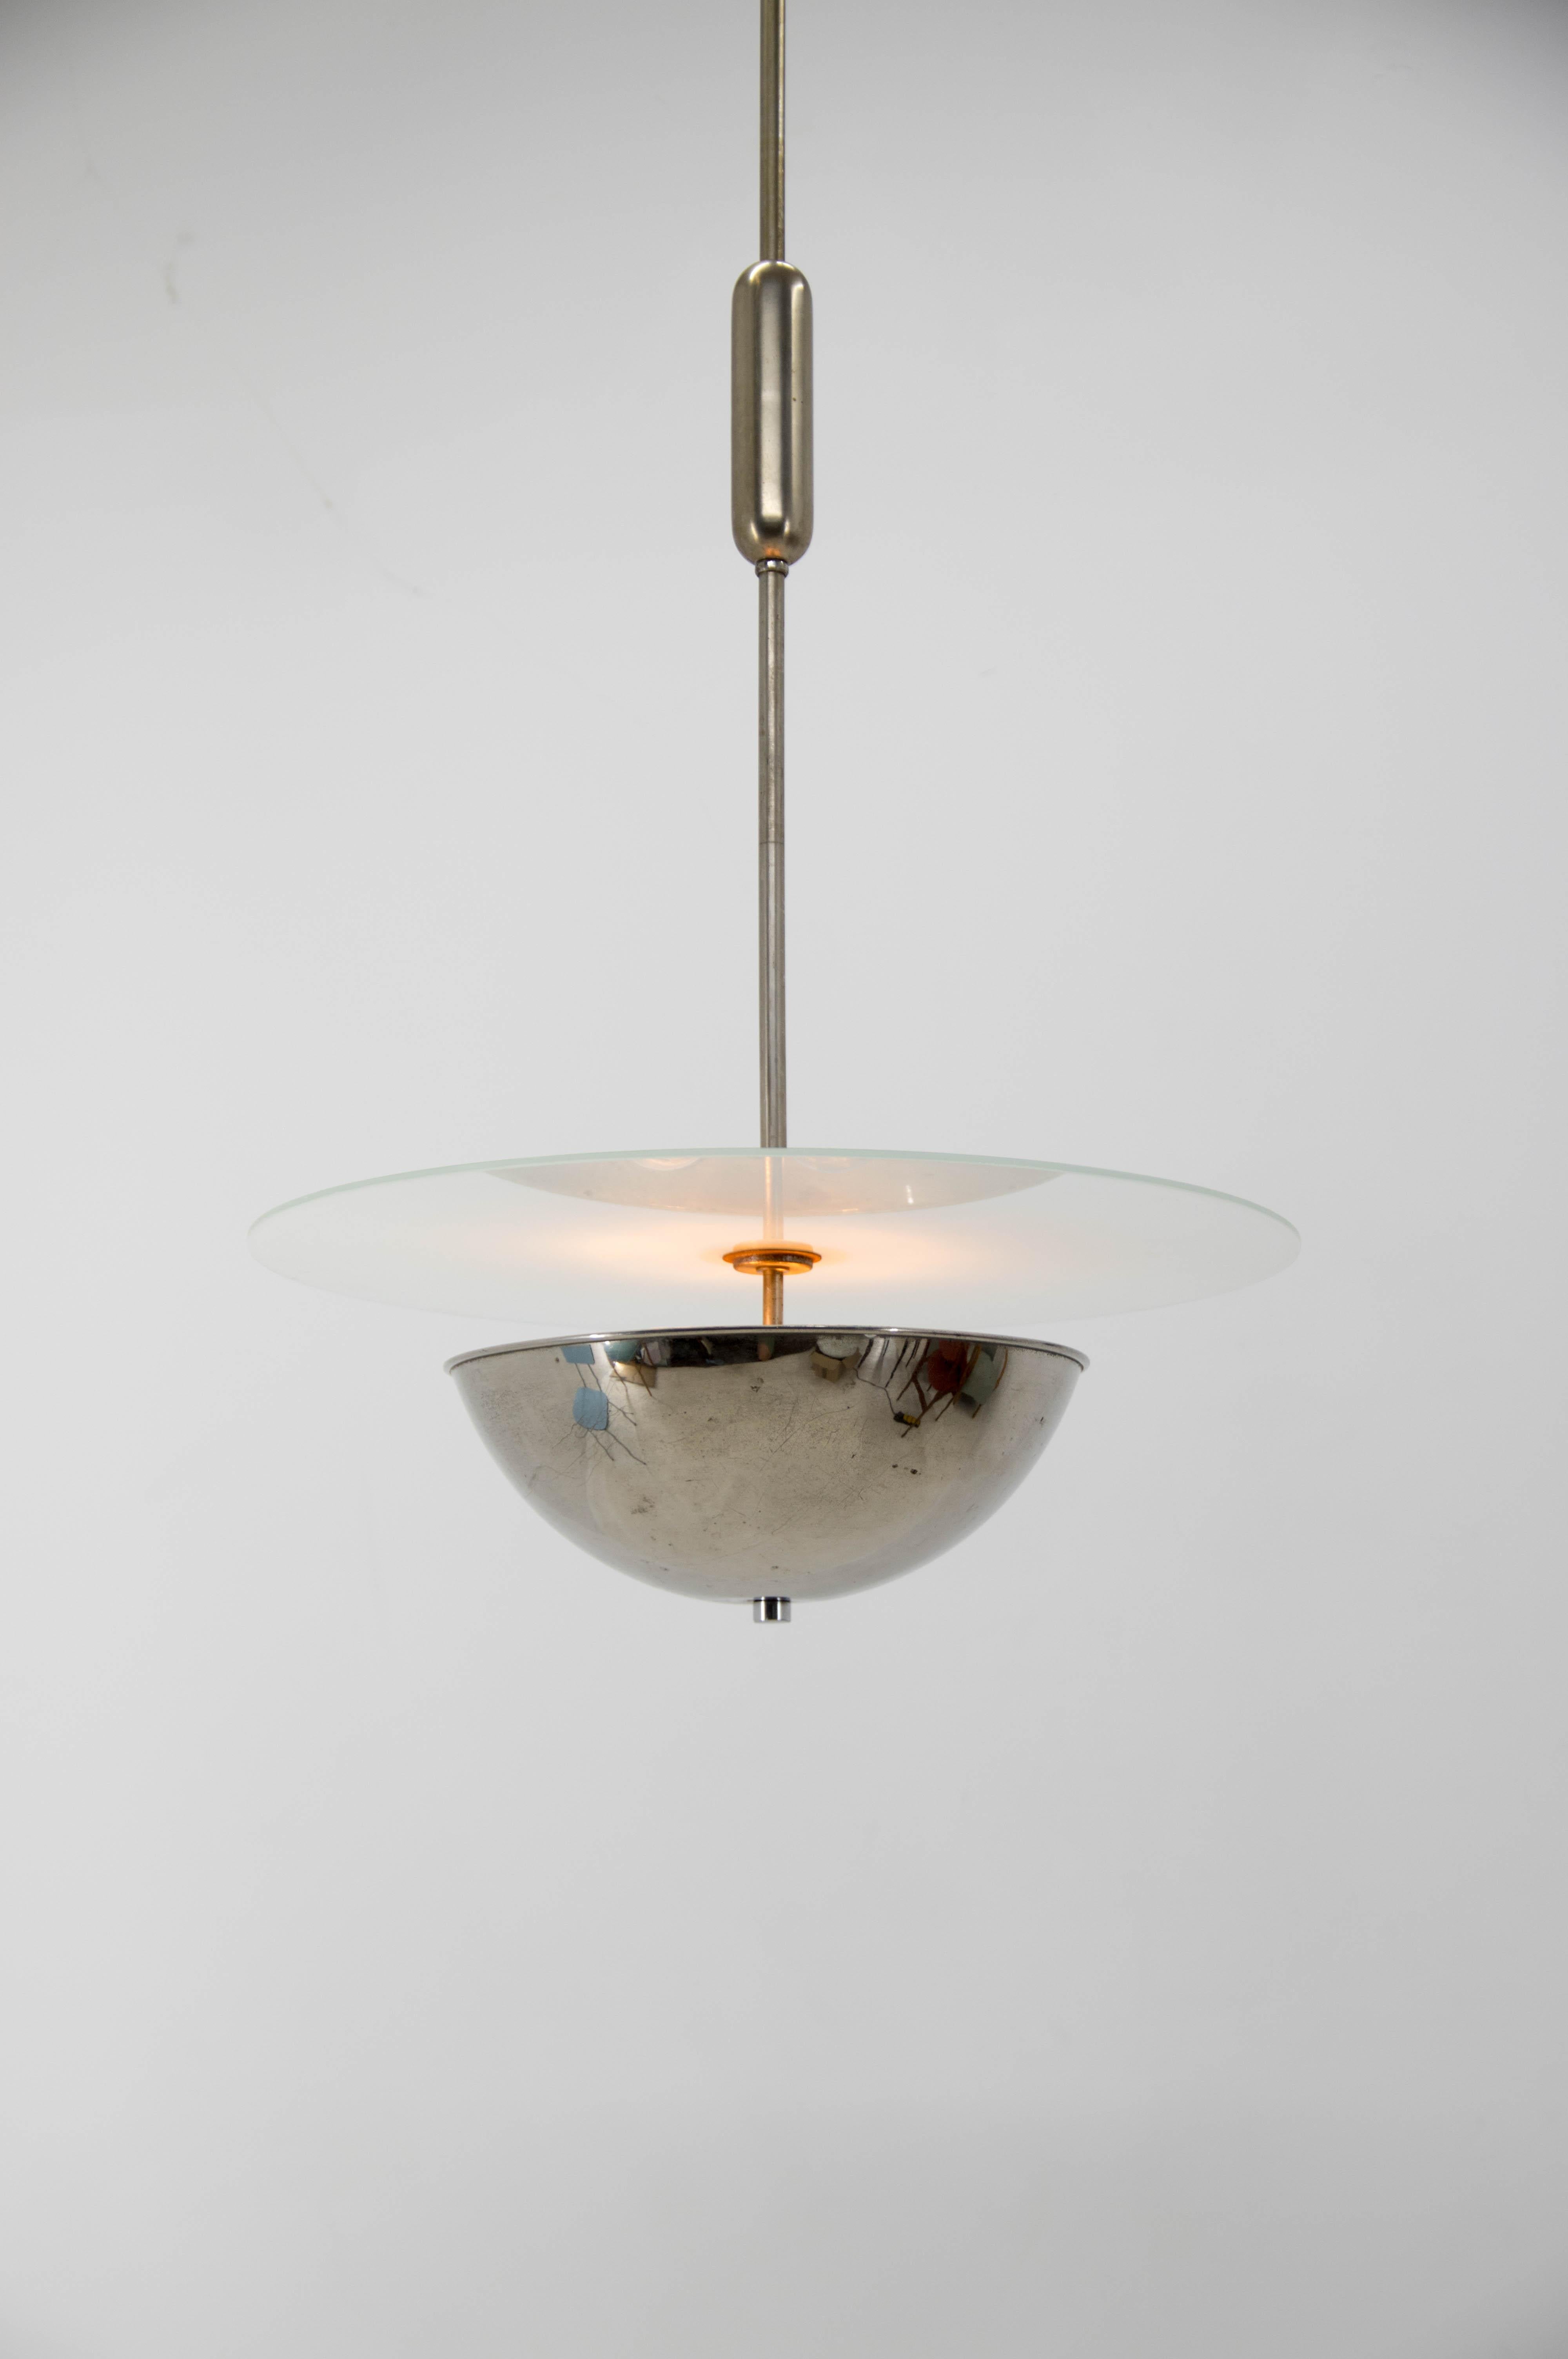 Simple and elegant Bauhaus chandelier.
Chrome with age patina
Sandblasted glass in perfect condition
Rewired - 2x60W, E25-E27 bulbs
US wiring compatible.